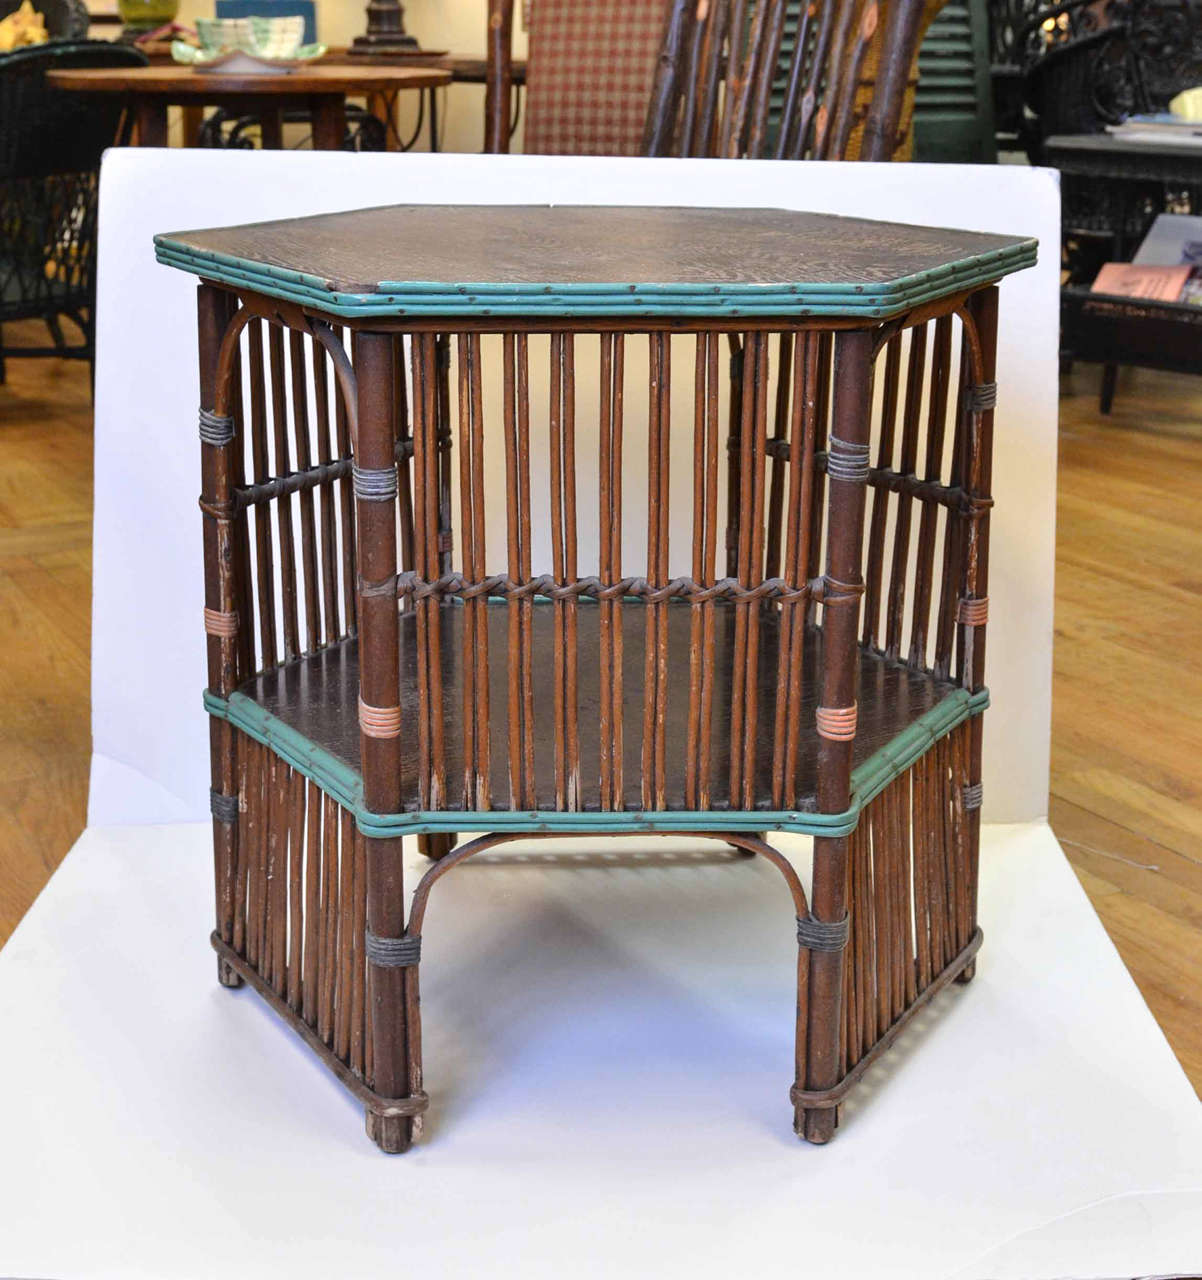 Hexagonal American wicker vintage table from 1920.  Painted in wonderful turquoise trim that is original to the piece.